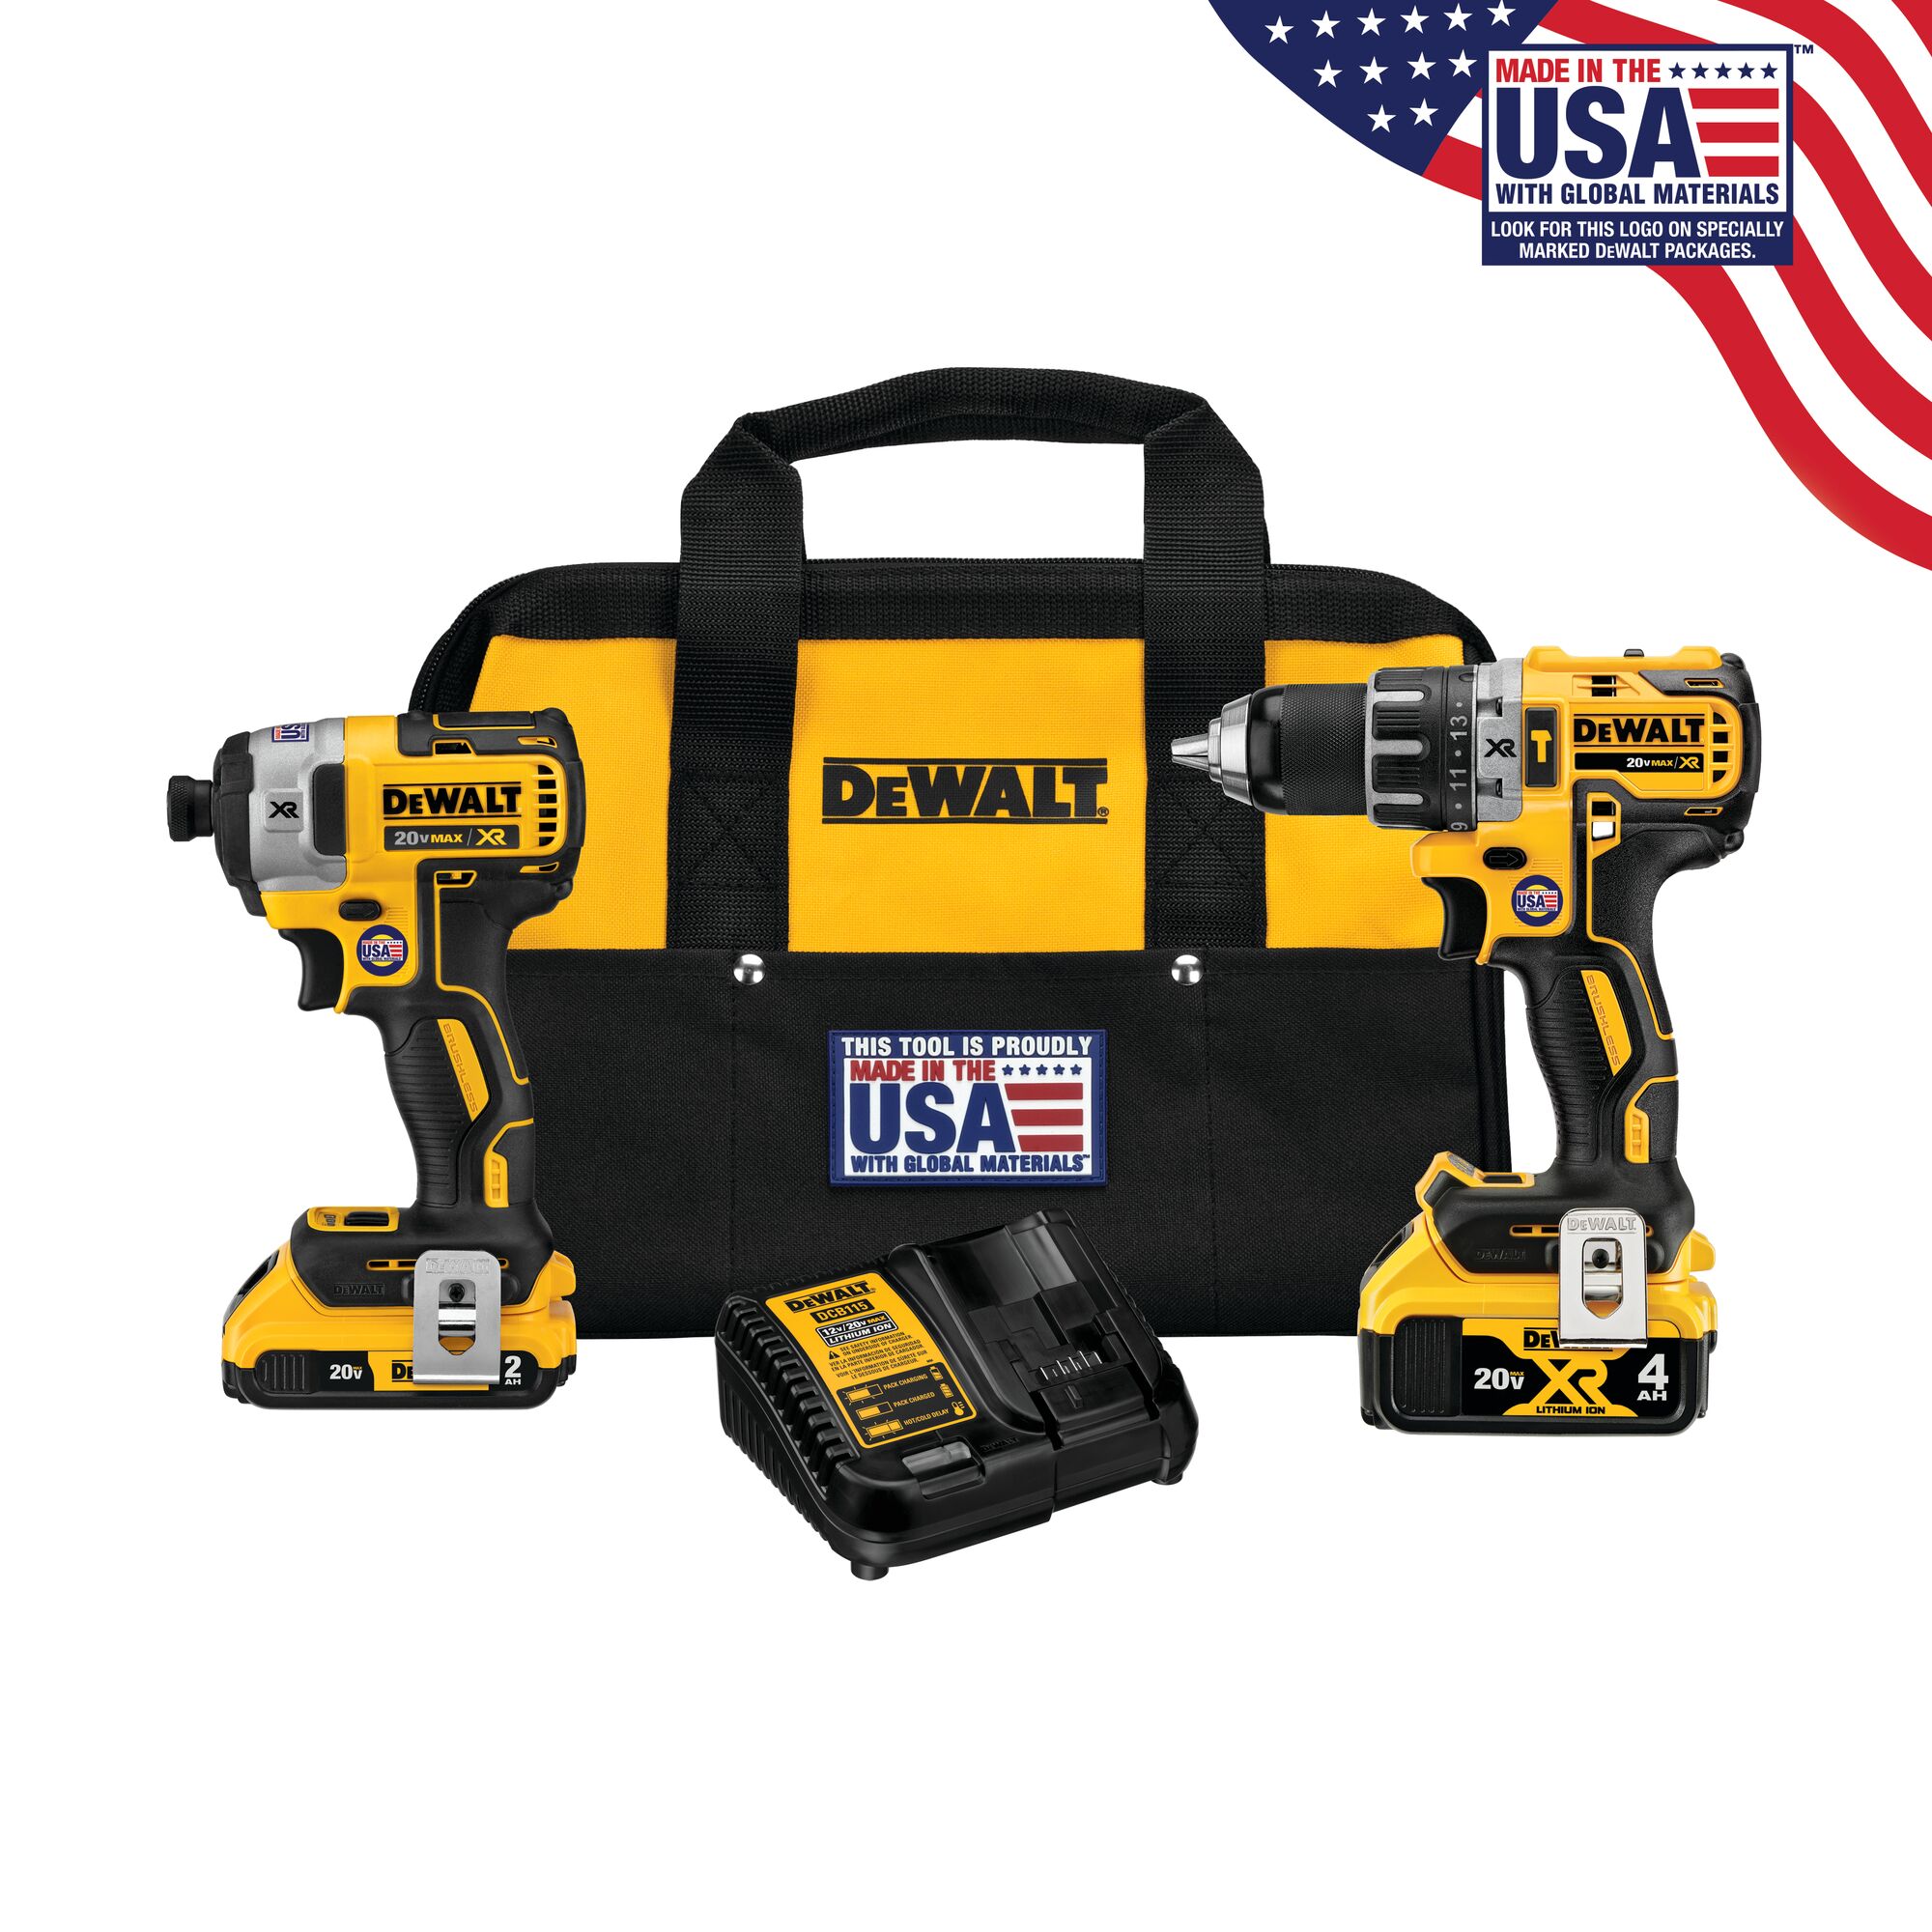 Lowes Clearance Sale Huge Tool Deals for September 2023 End of Month  Discount Deals! 